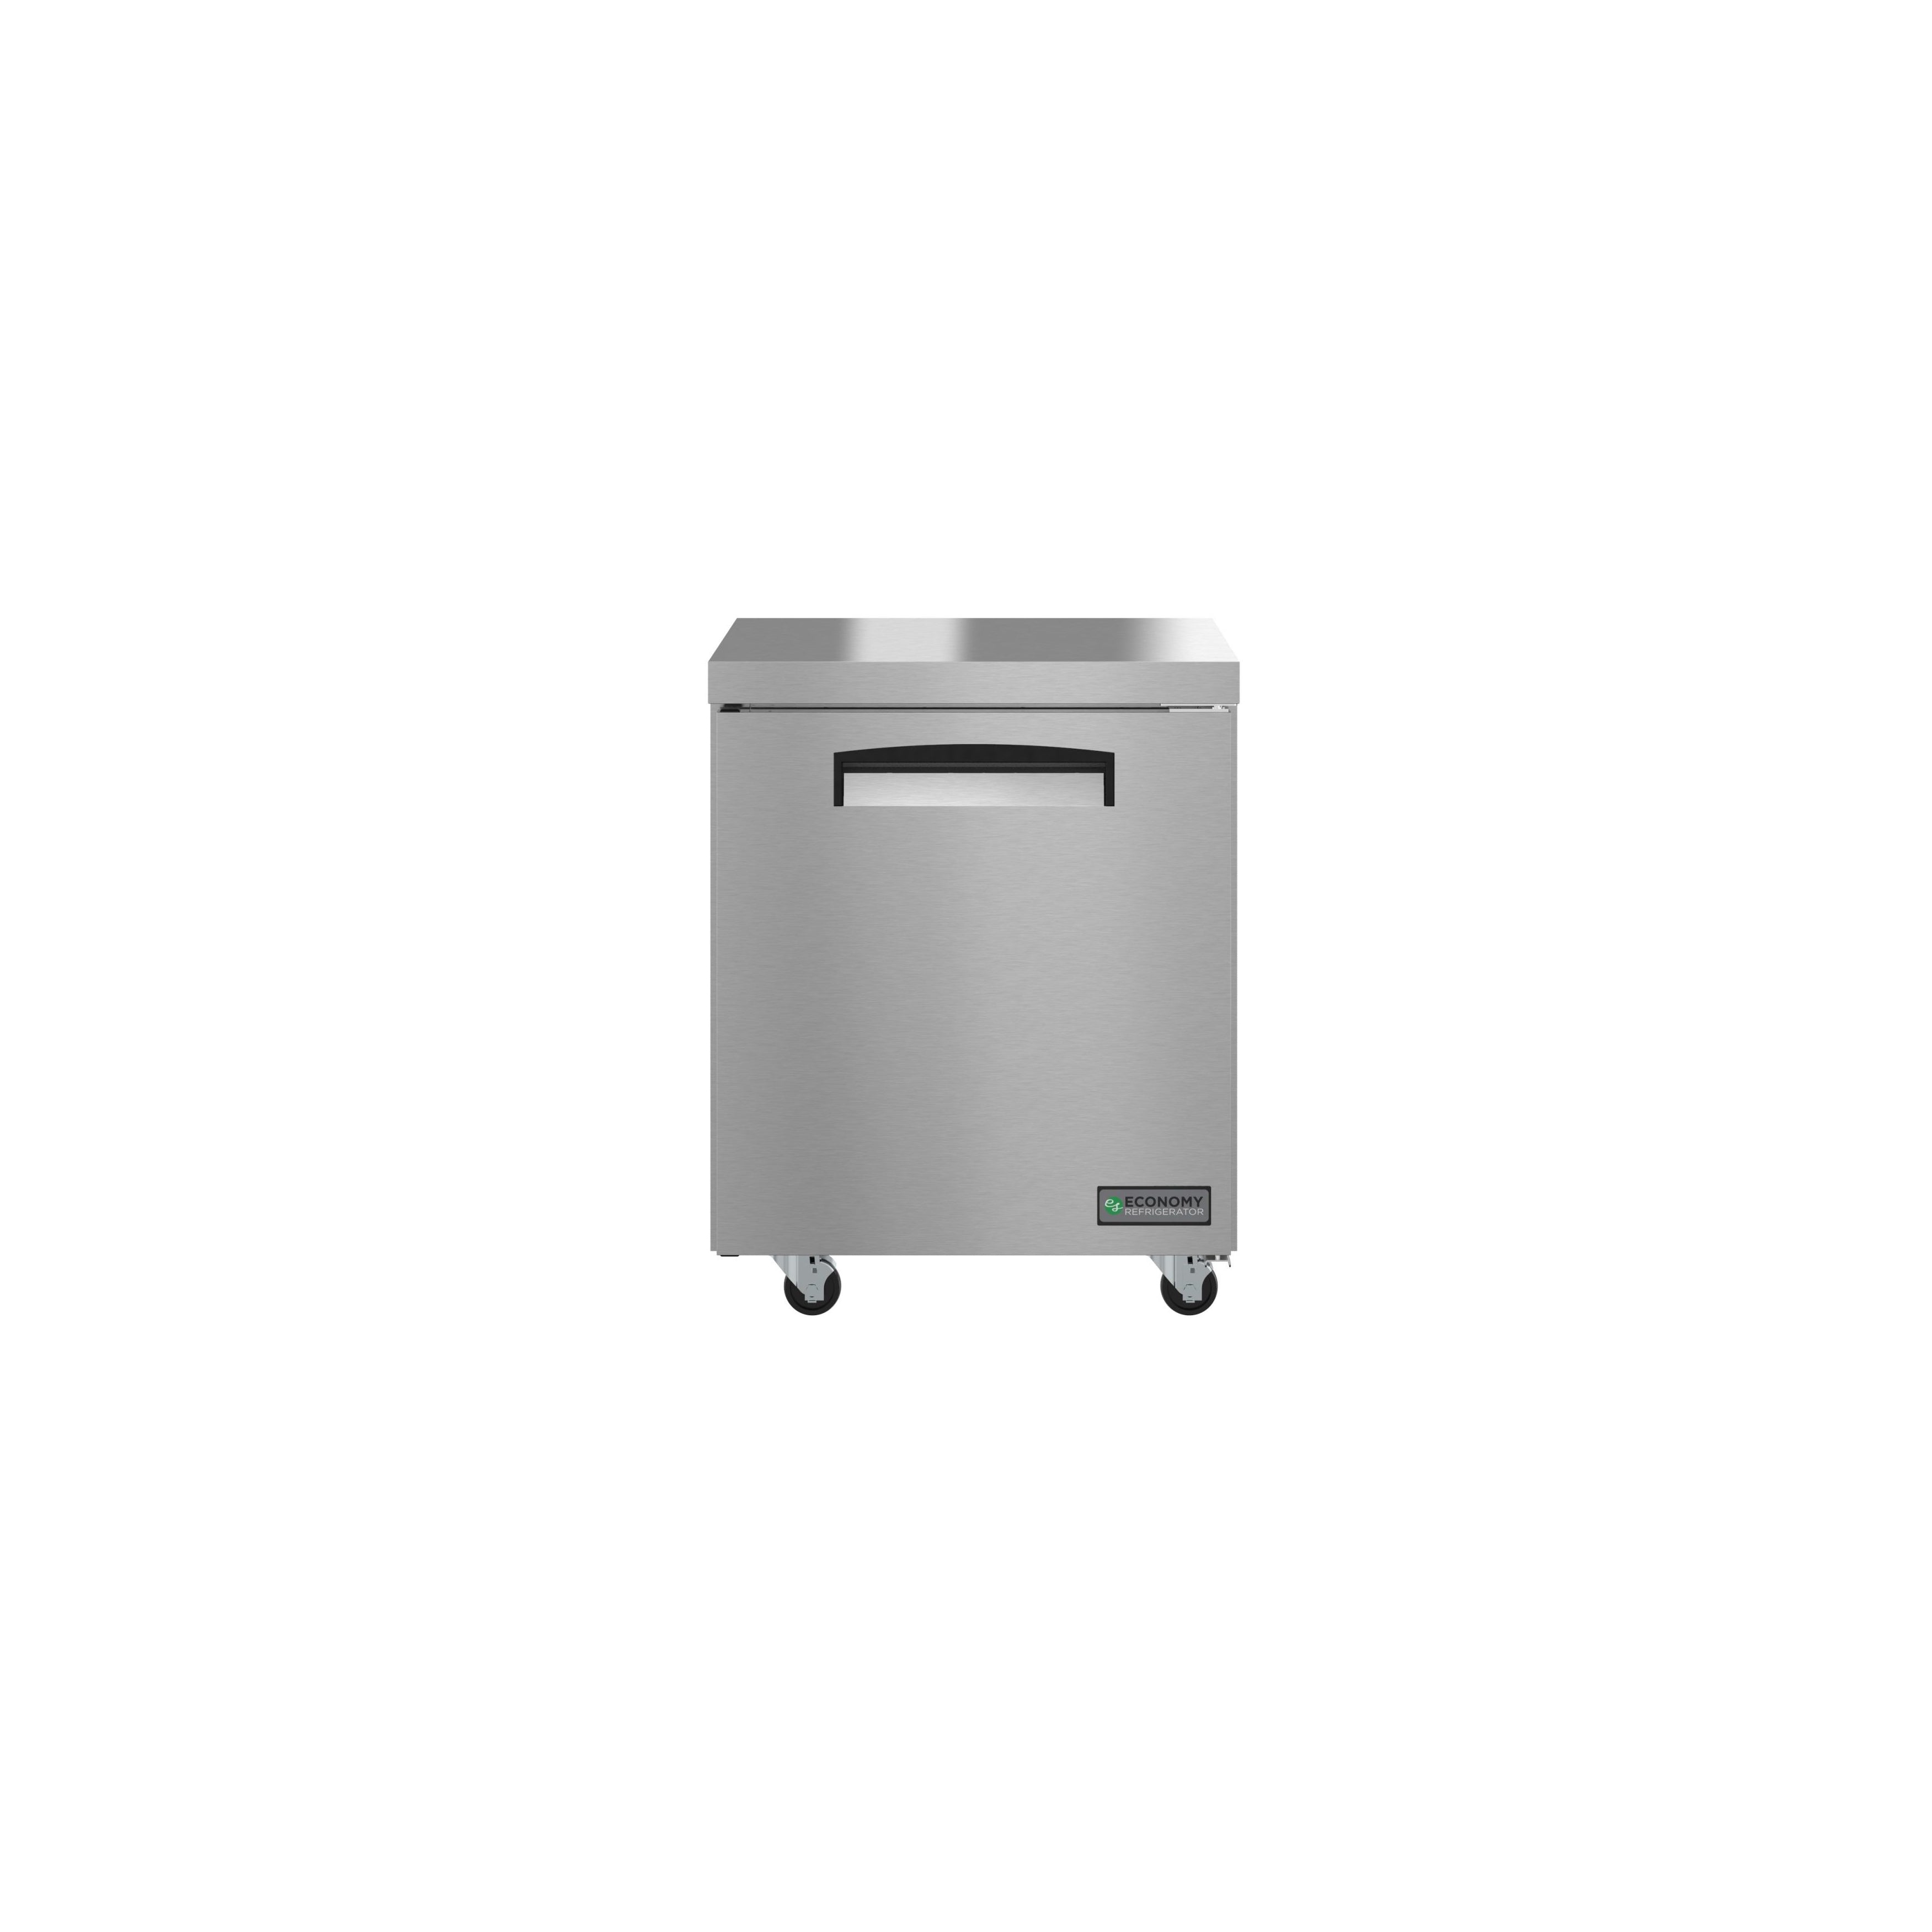 UF27A, Freezer, Single Section Undercounter, Stainless Door